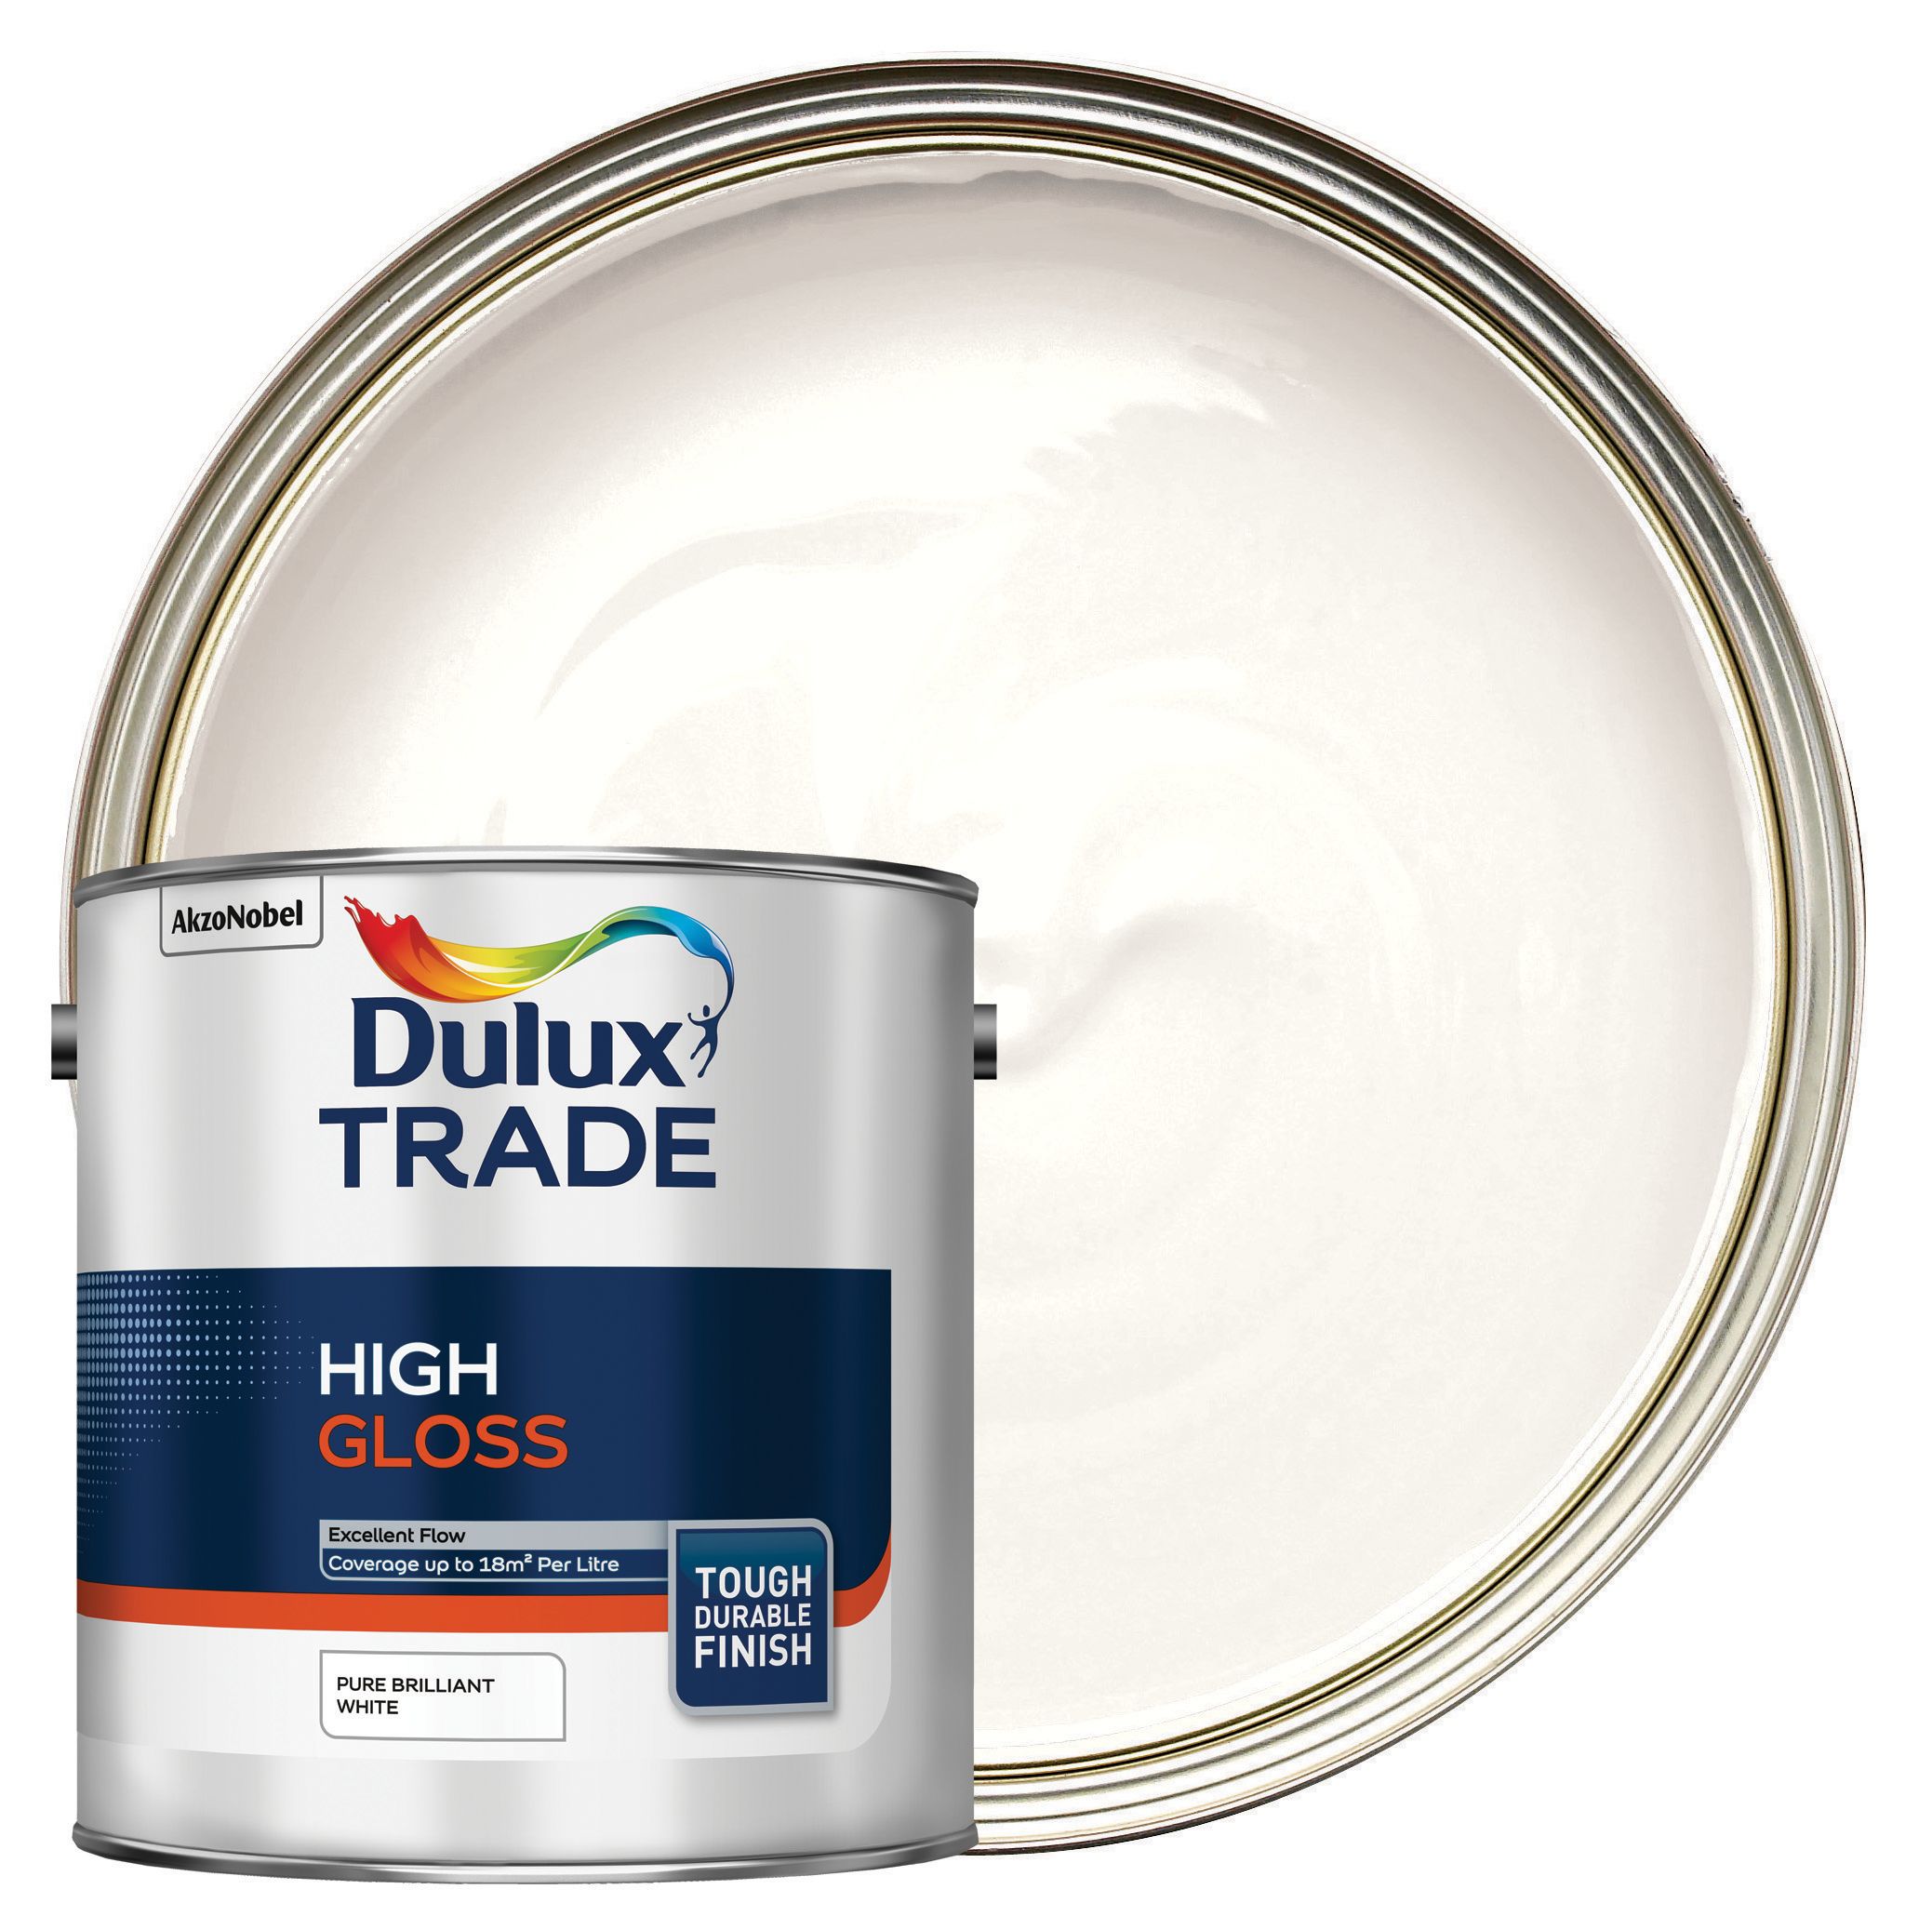 Image of Dulux Trade High Gloss Paint - Pure Brilliant White - 2.5L